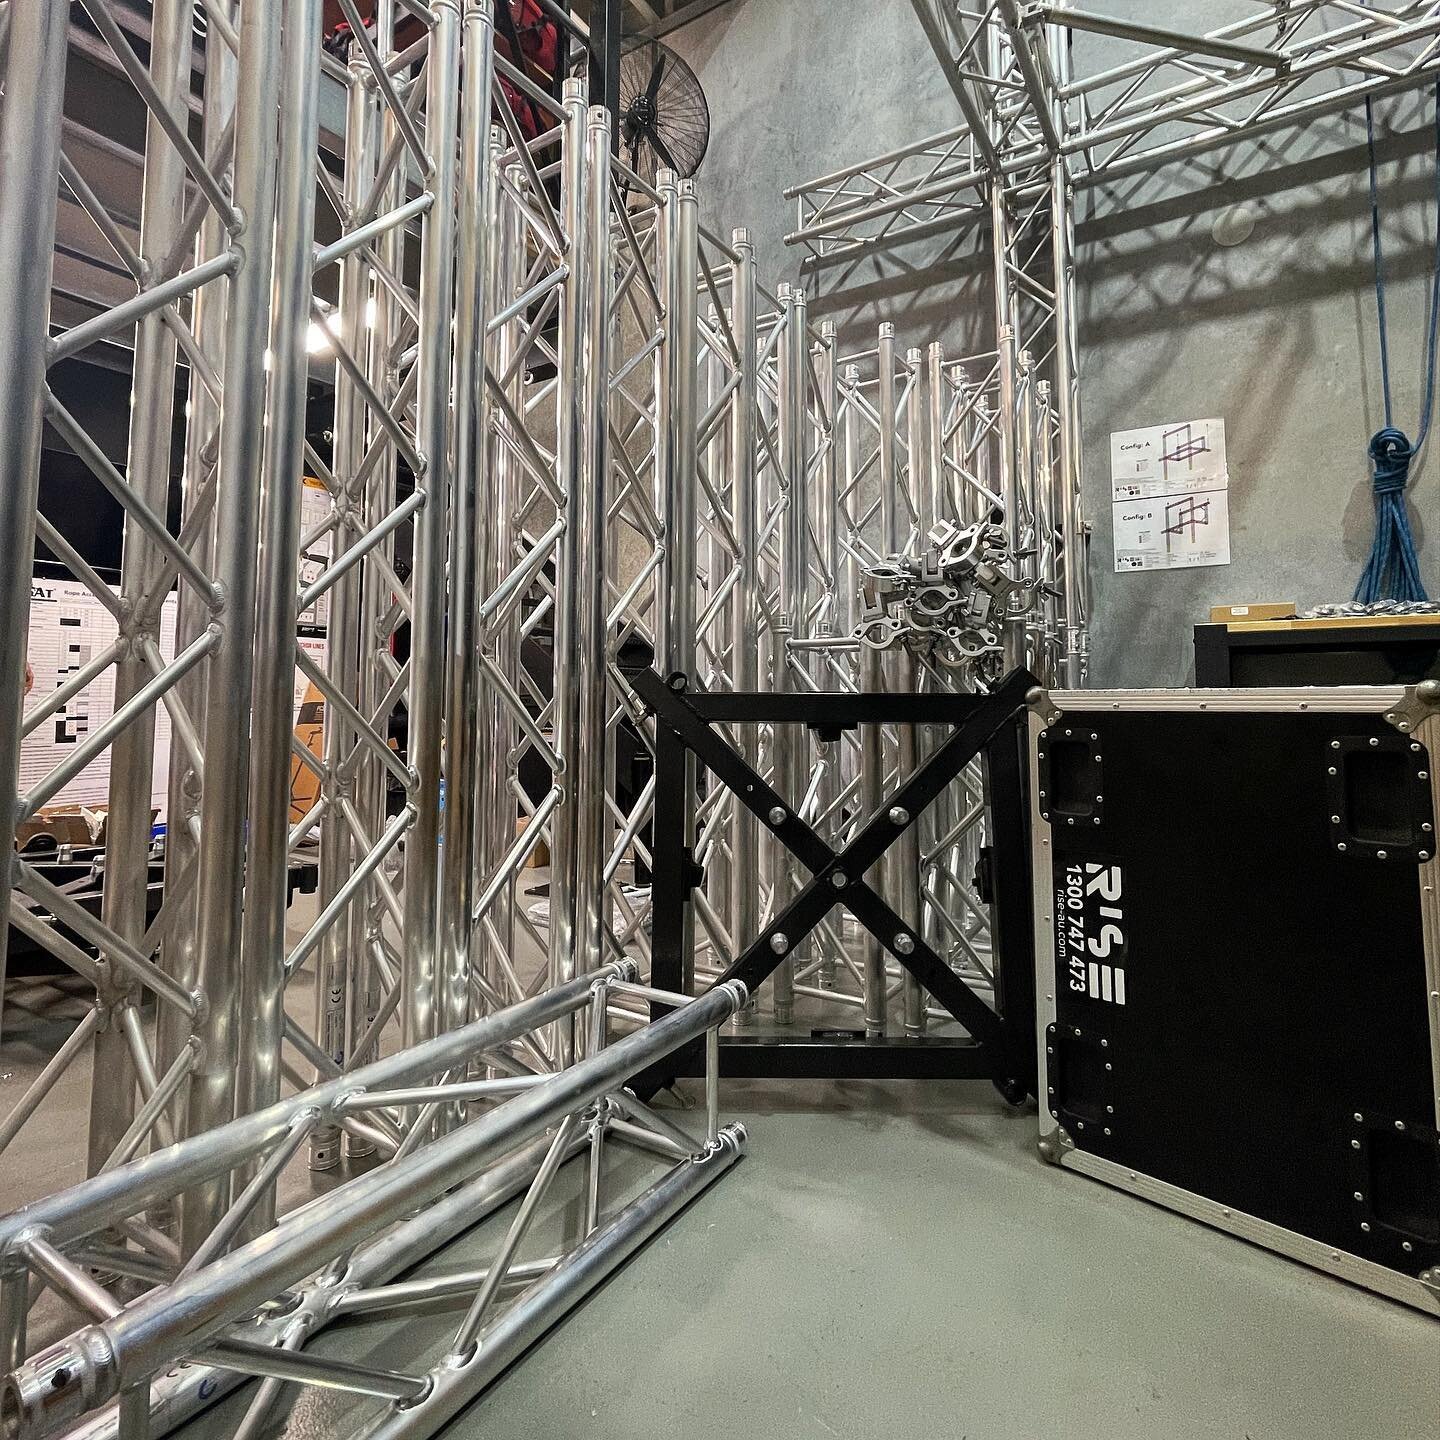 Another 24m of @global.truss F34P, more diagonal braces and ground support bases now in hire stock at @rise.pacific . This adds to our large inventory of F34P and we look forward to using it to support upcoming productions and rigging projects!

Than